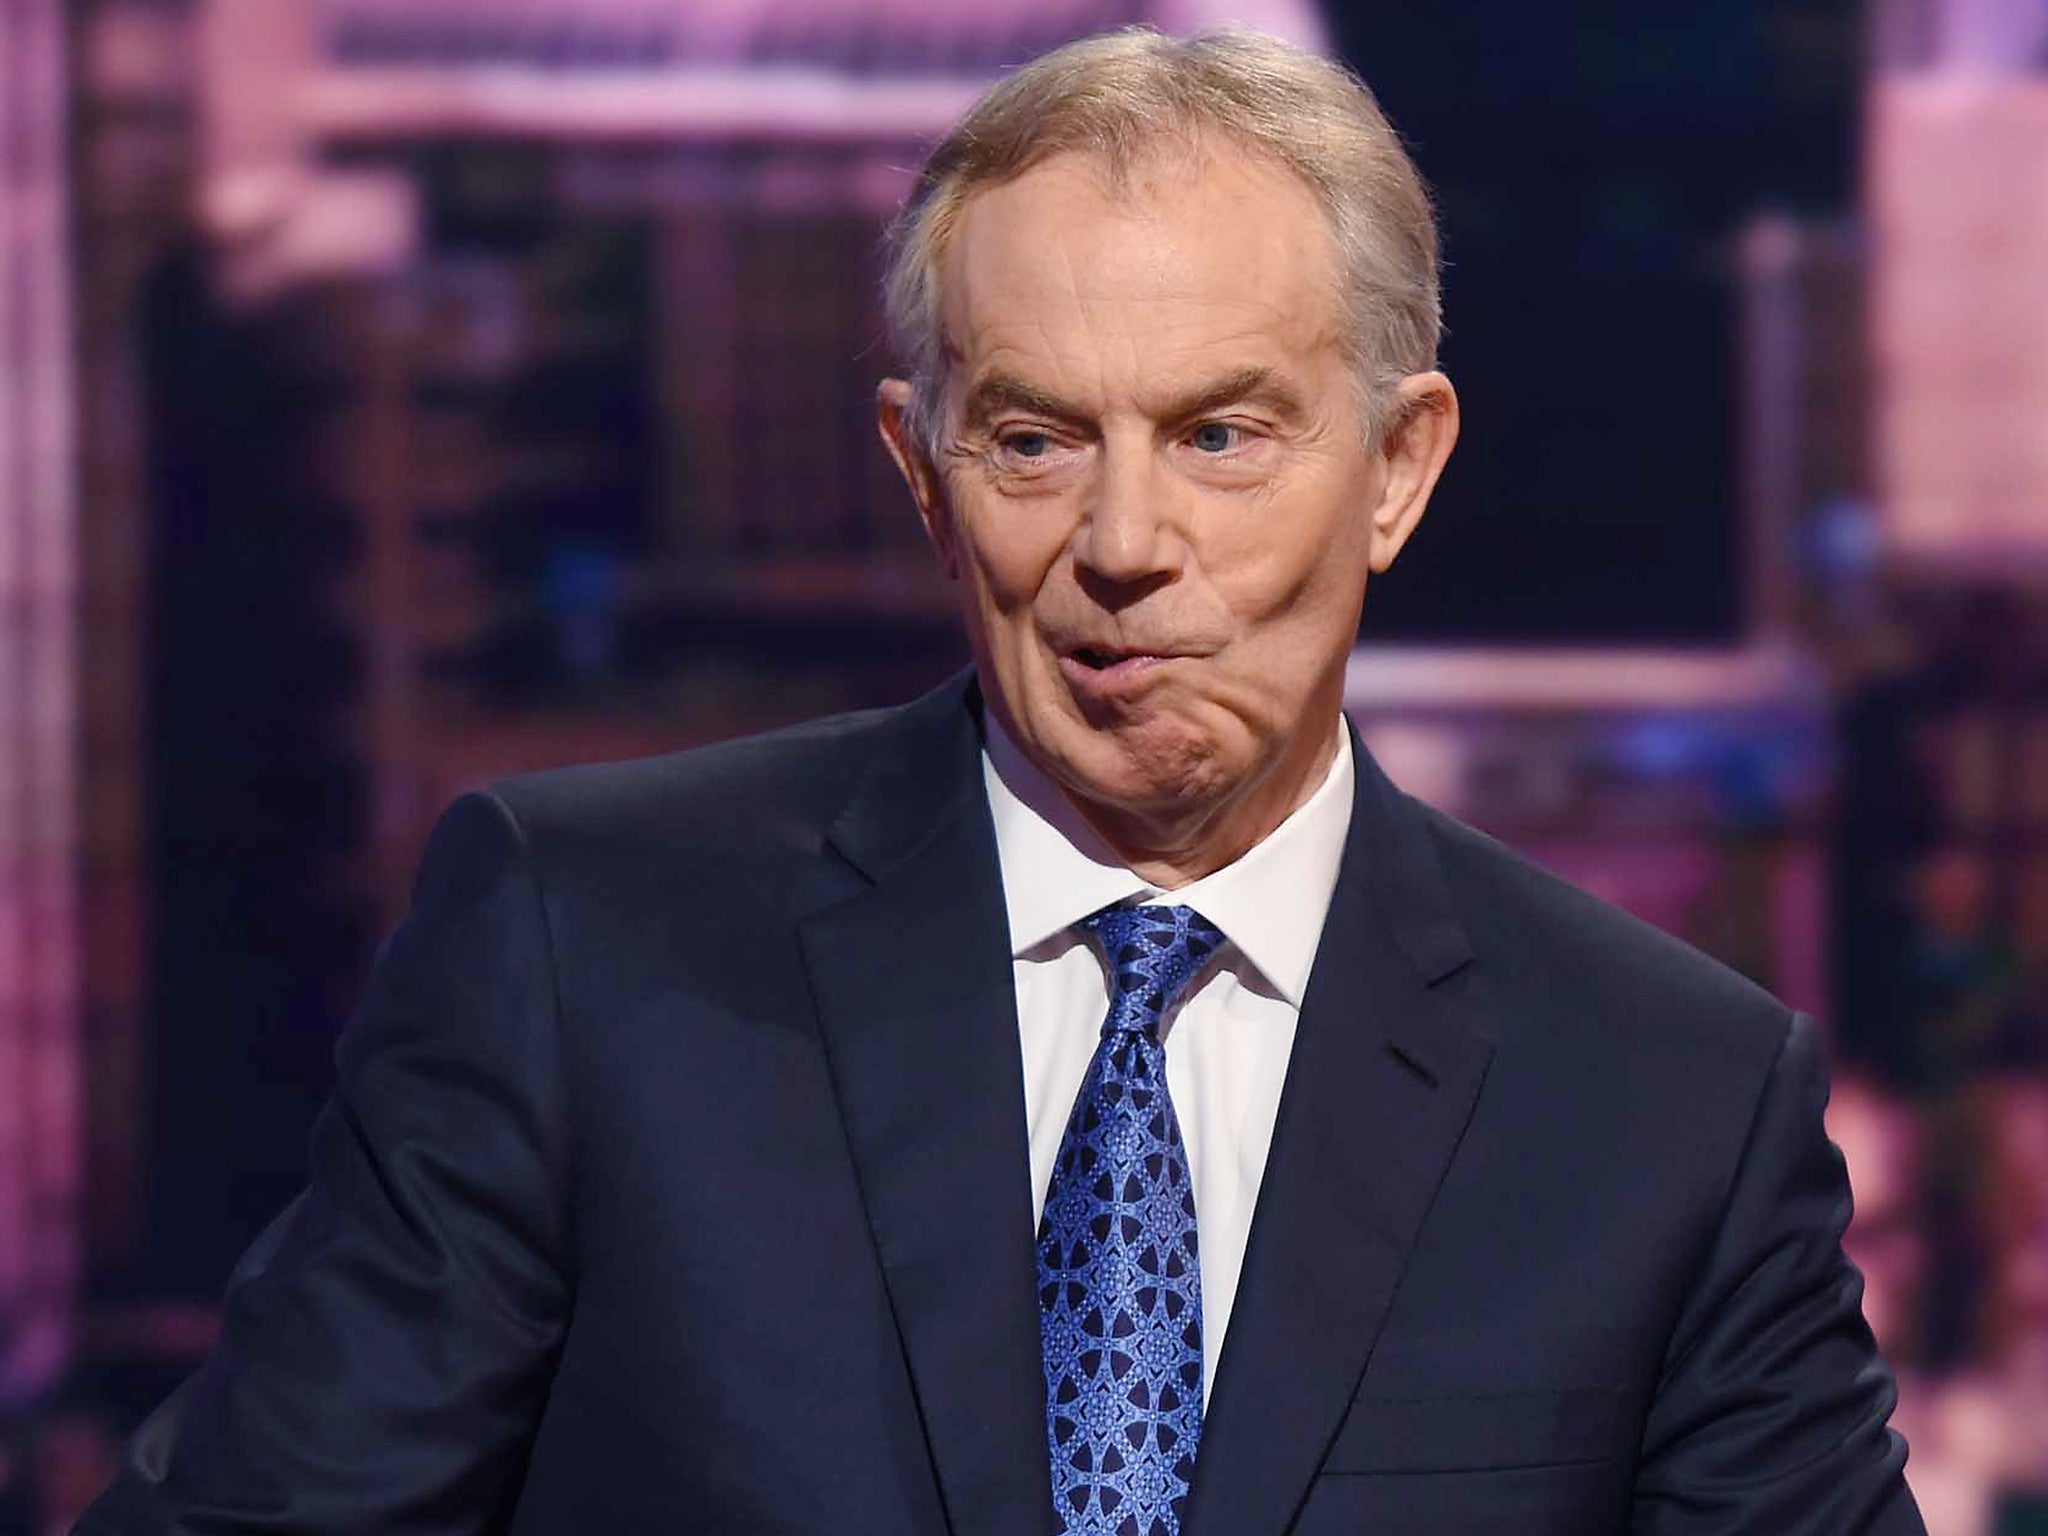 Tony Blair appearing on the Andrew Marr Show during the general election cycle